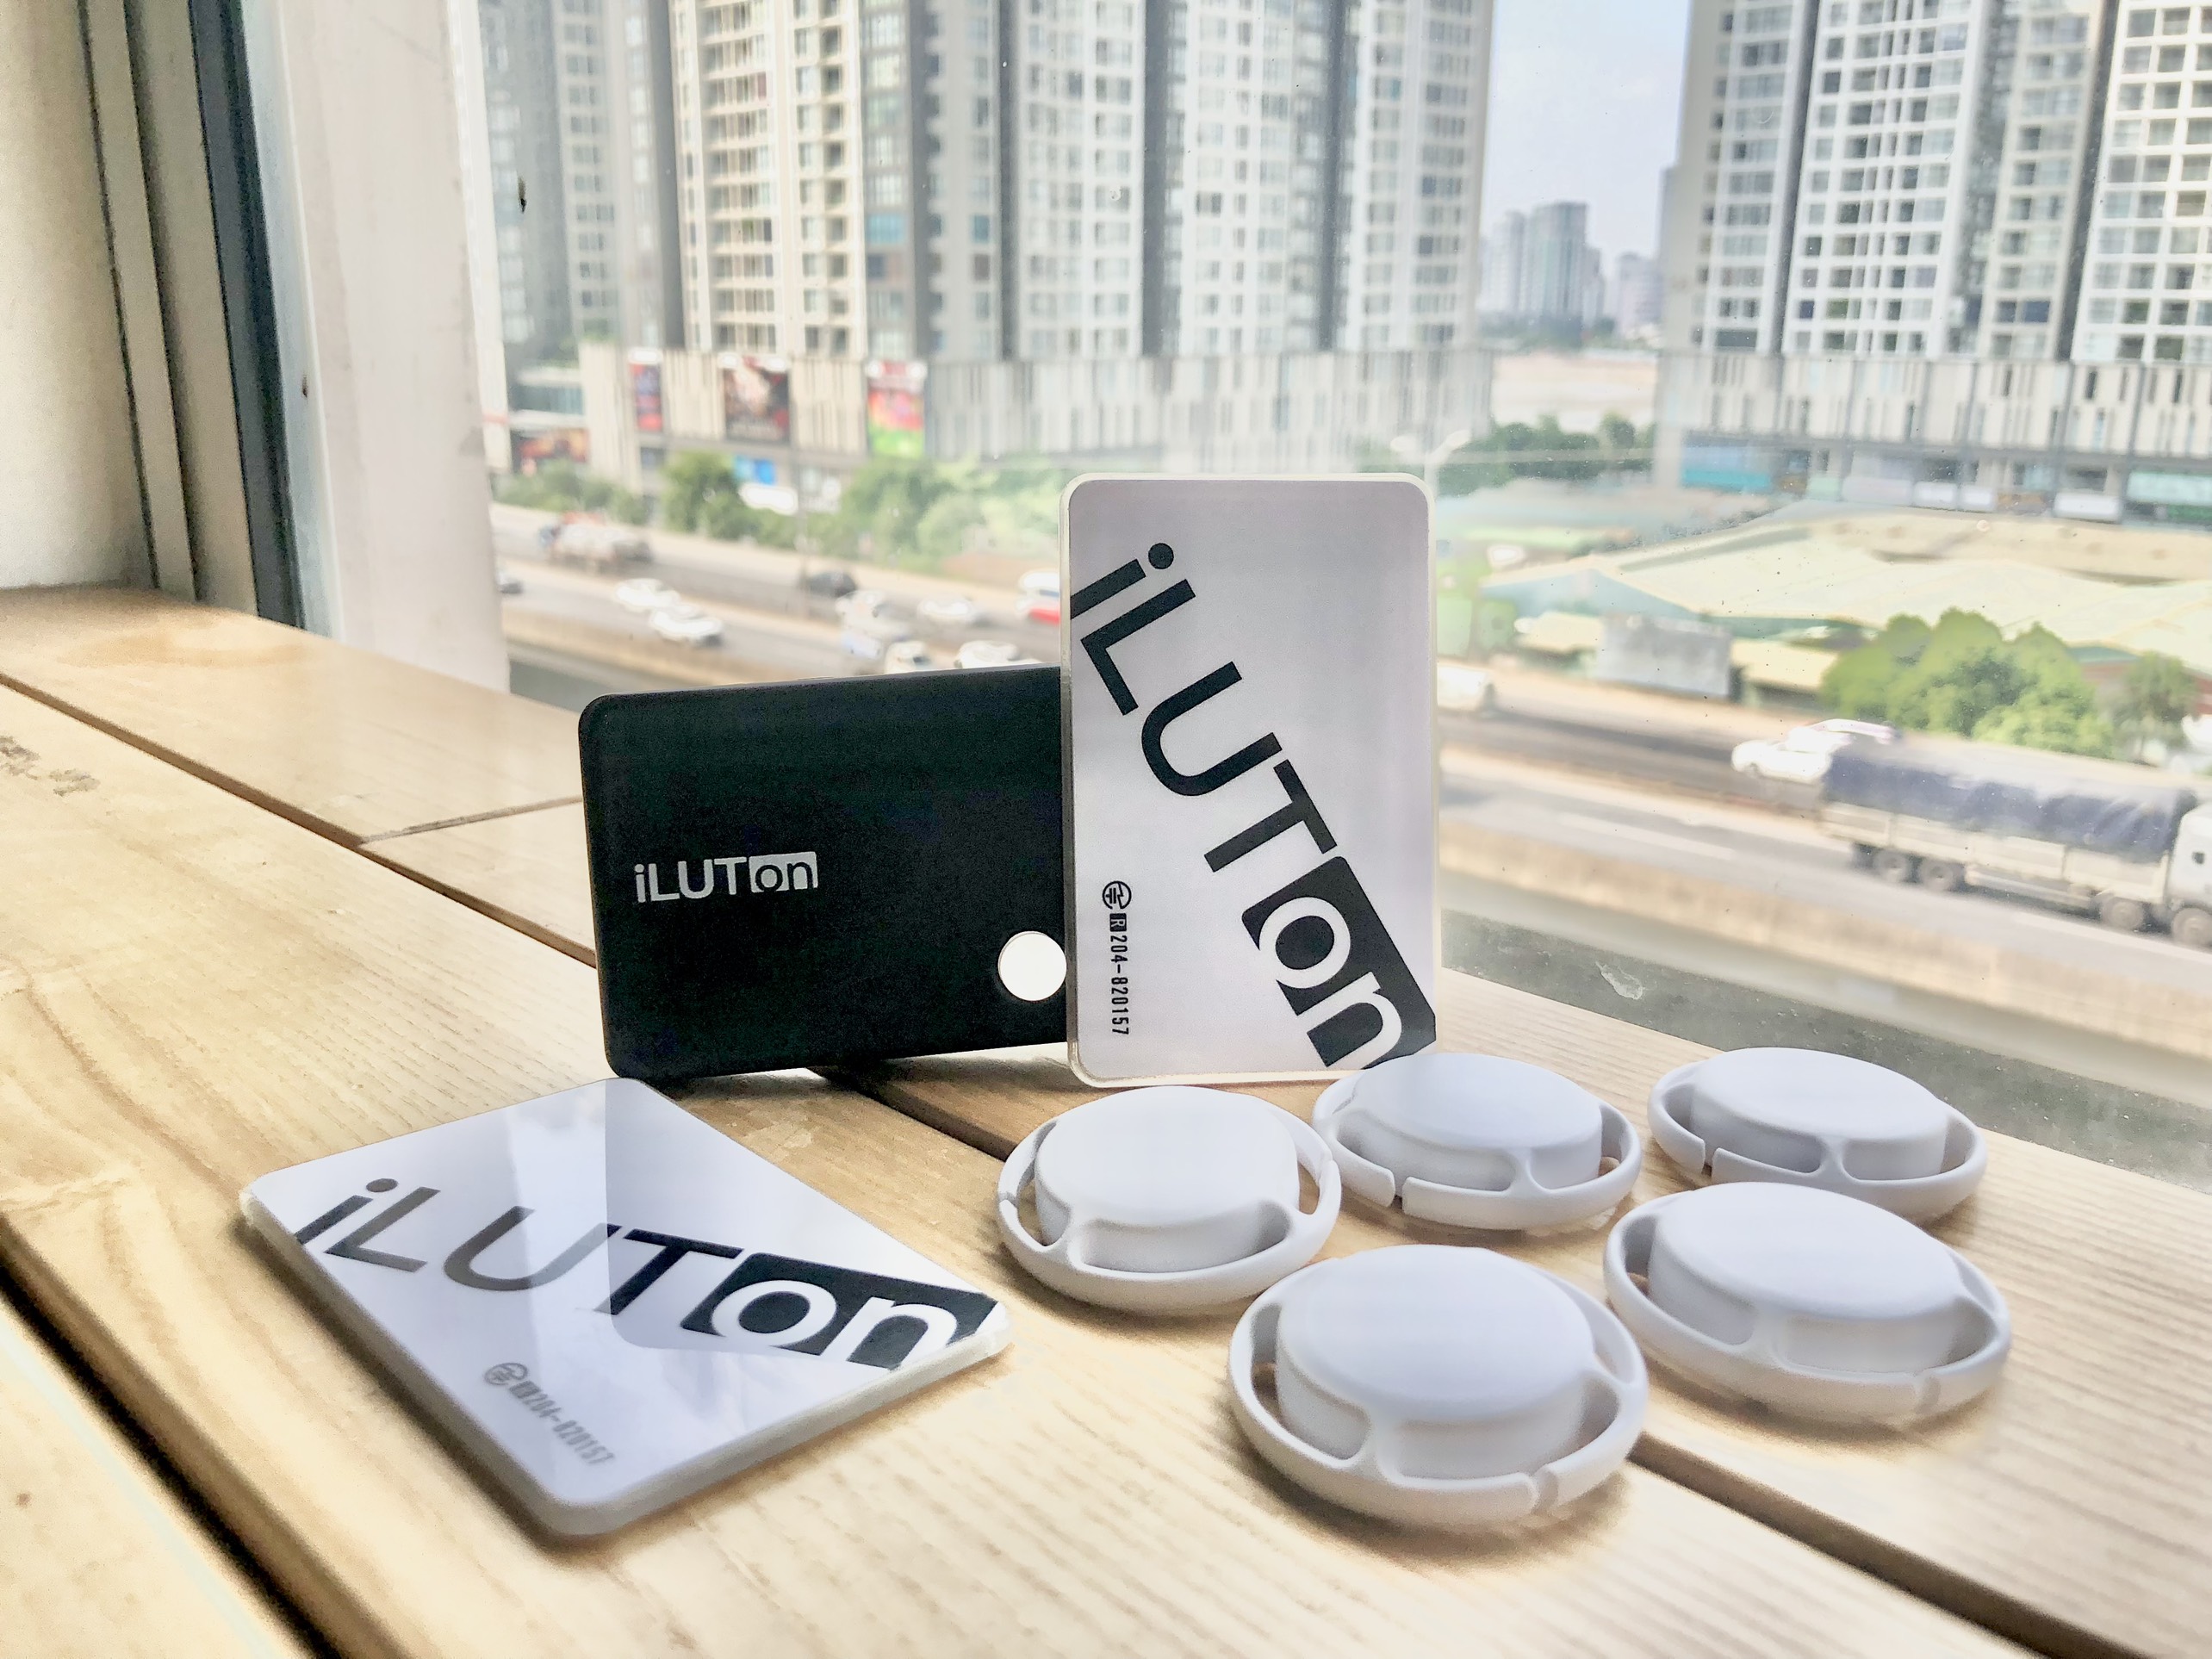 The Upgraded Version Of The Smart Security Card "iLUTon", iLUTon-R, Is Going To Be Released